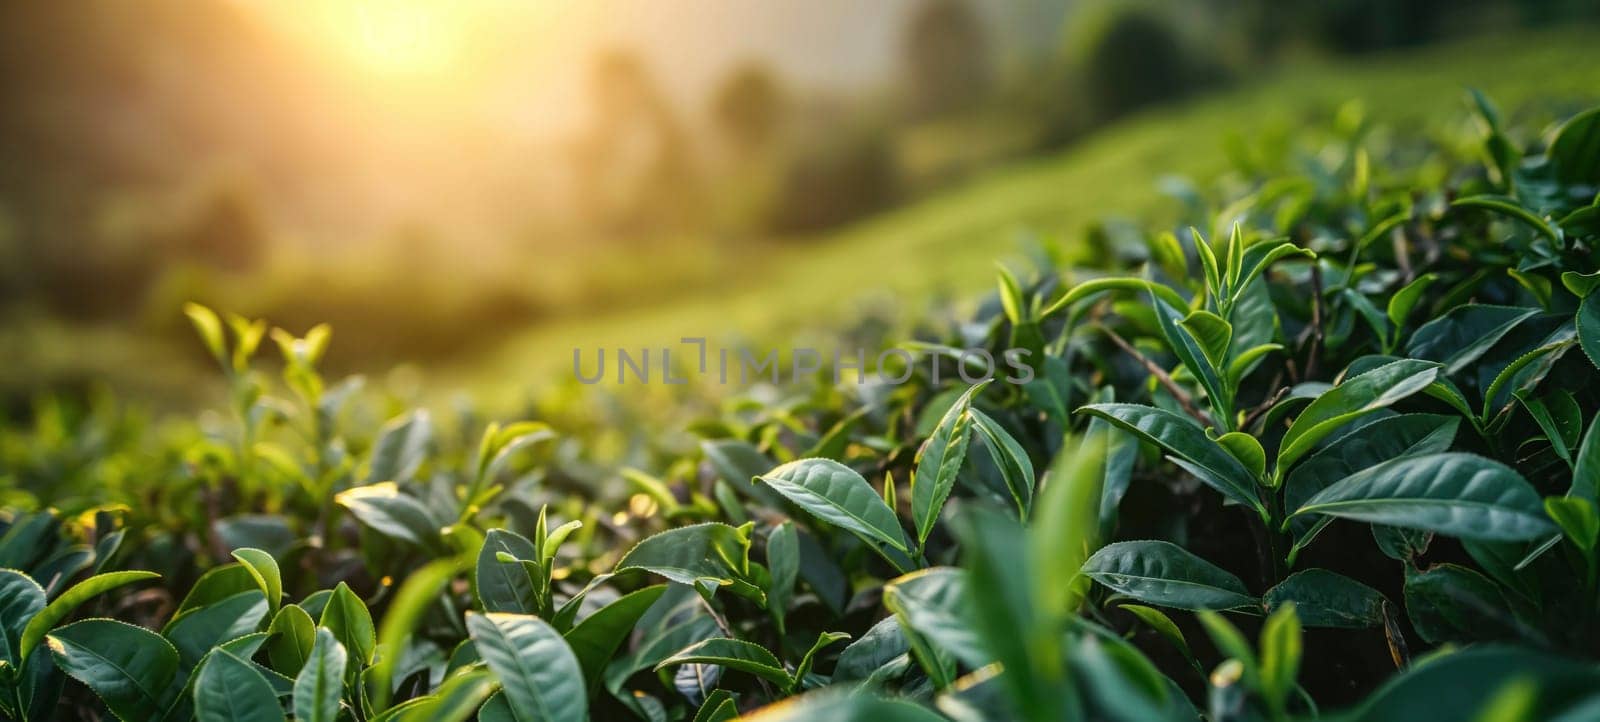 Close-up of vibrant green tea leaves in a sunlit plantation with misty mountains in the background, symbolizing freshness.